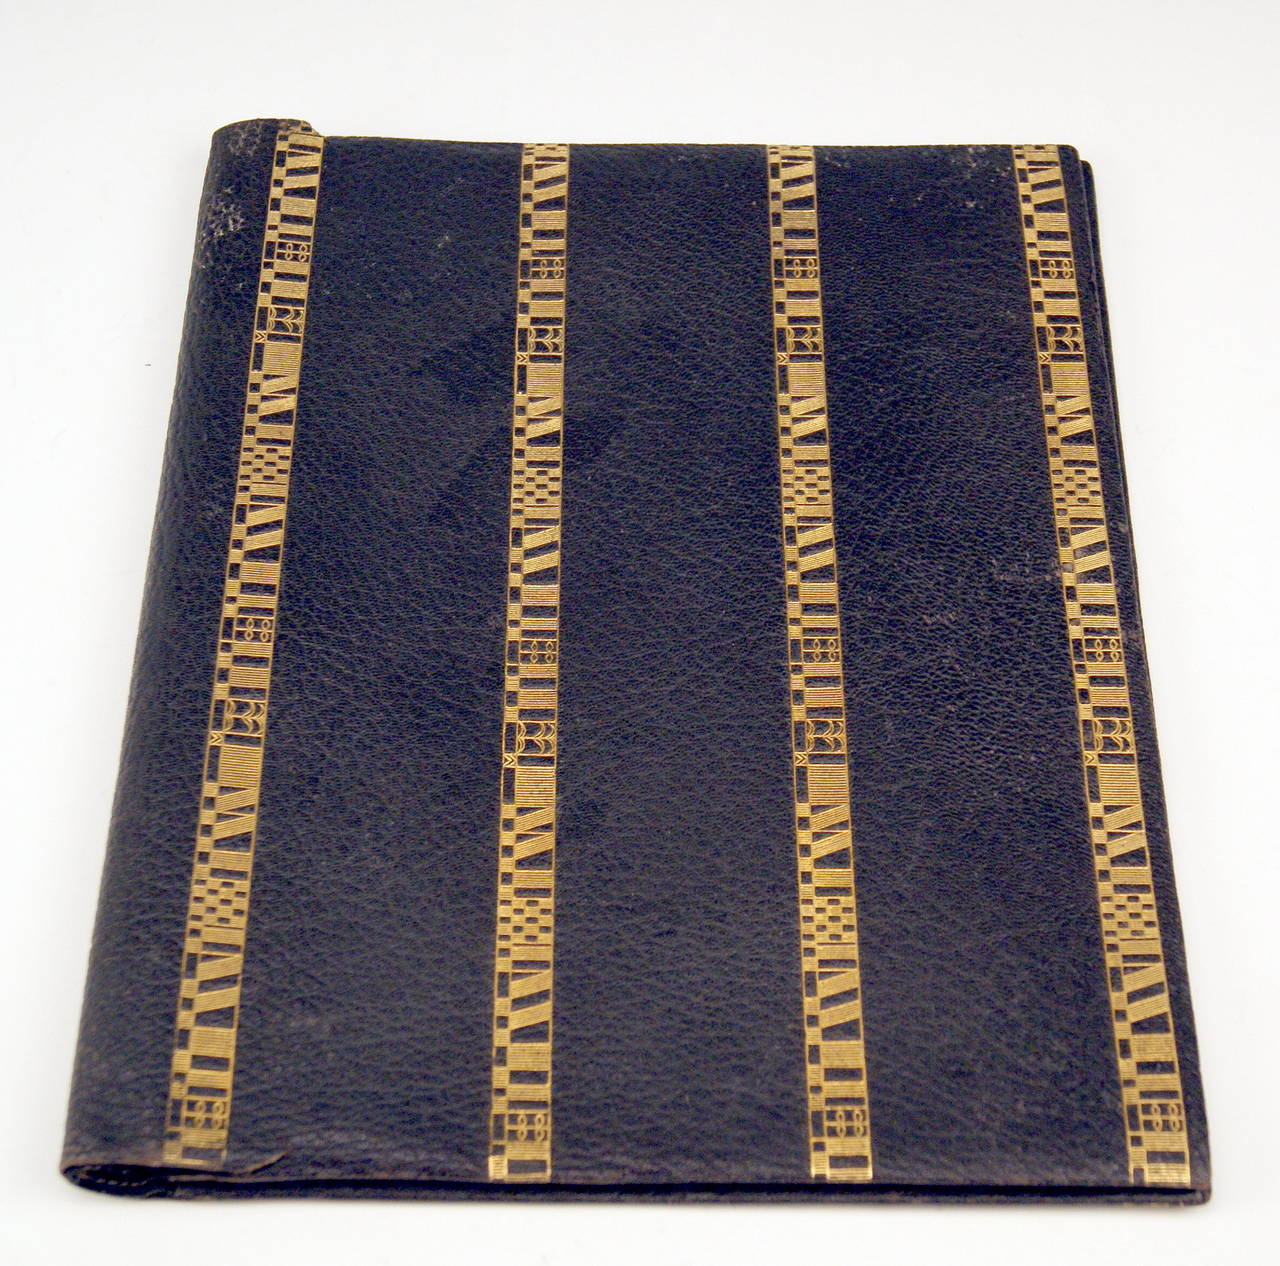 Josef Hoffmann Vienna's Workshops Leather Cover for Documents, circa 1925 2